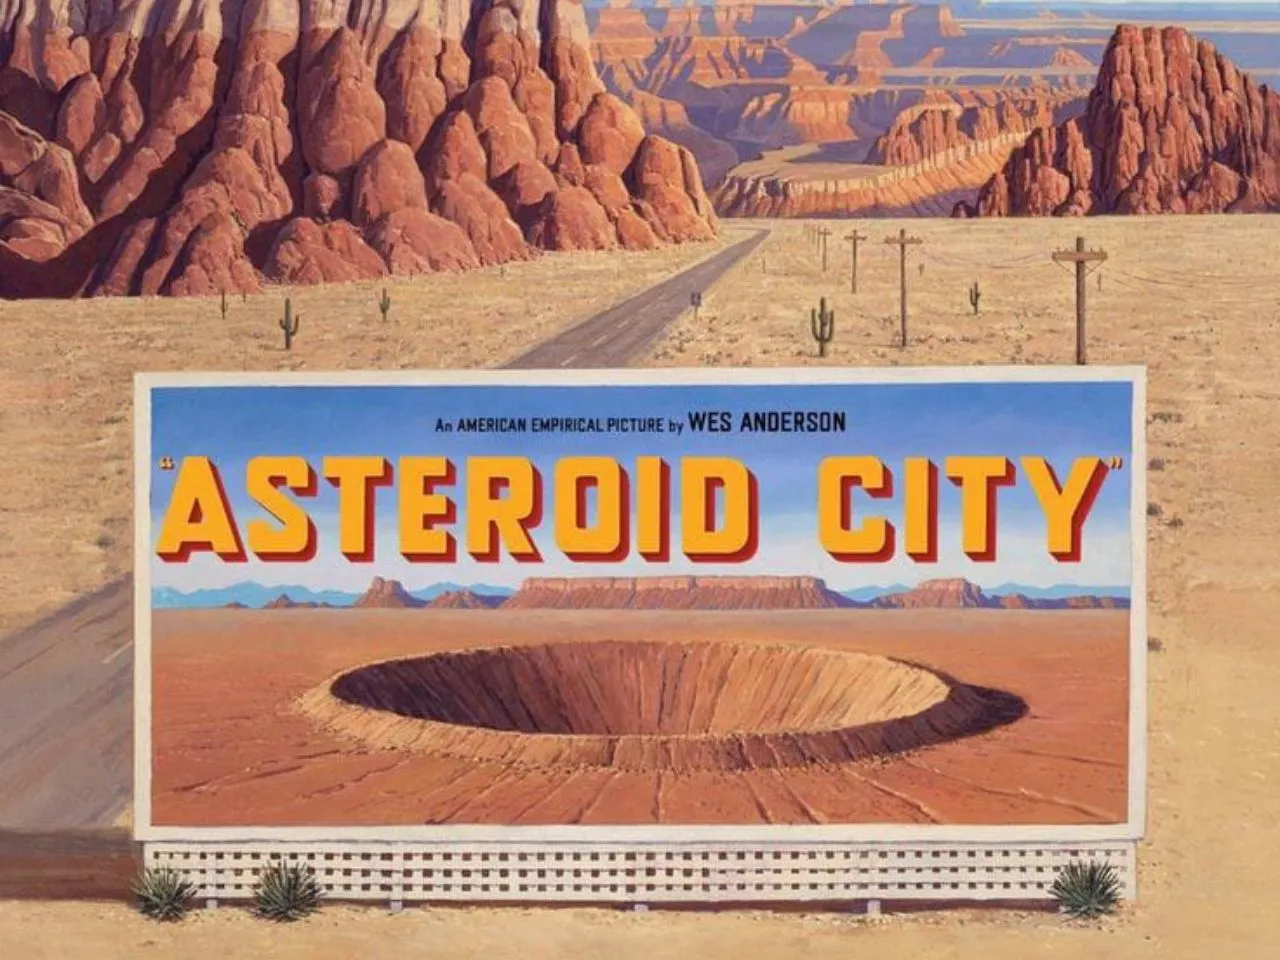 Asteroid City review: Wes Anderson's latest film is to be enjoyed more than understood